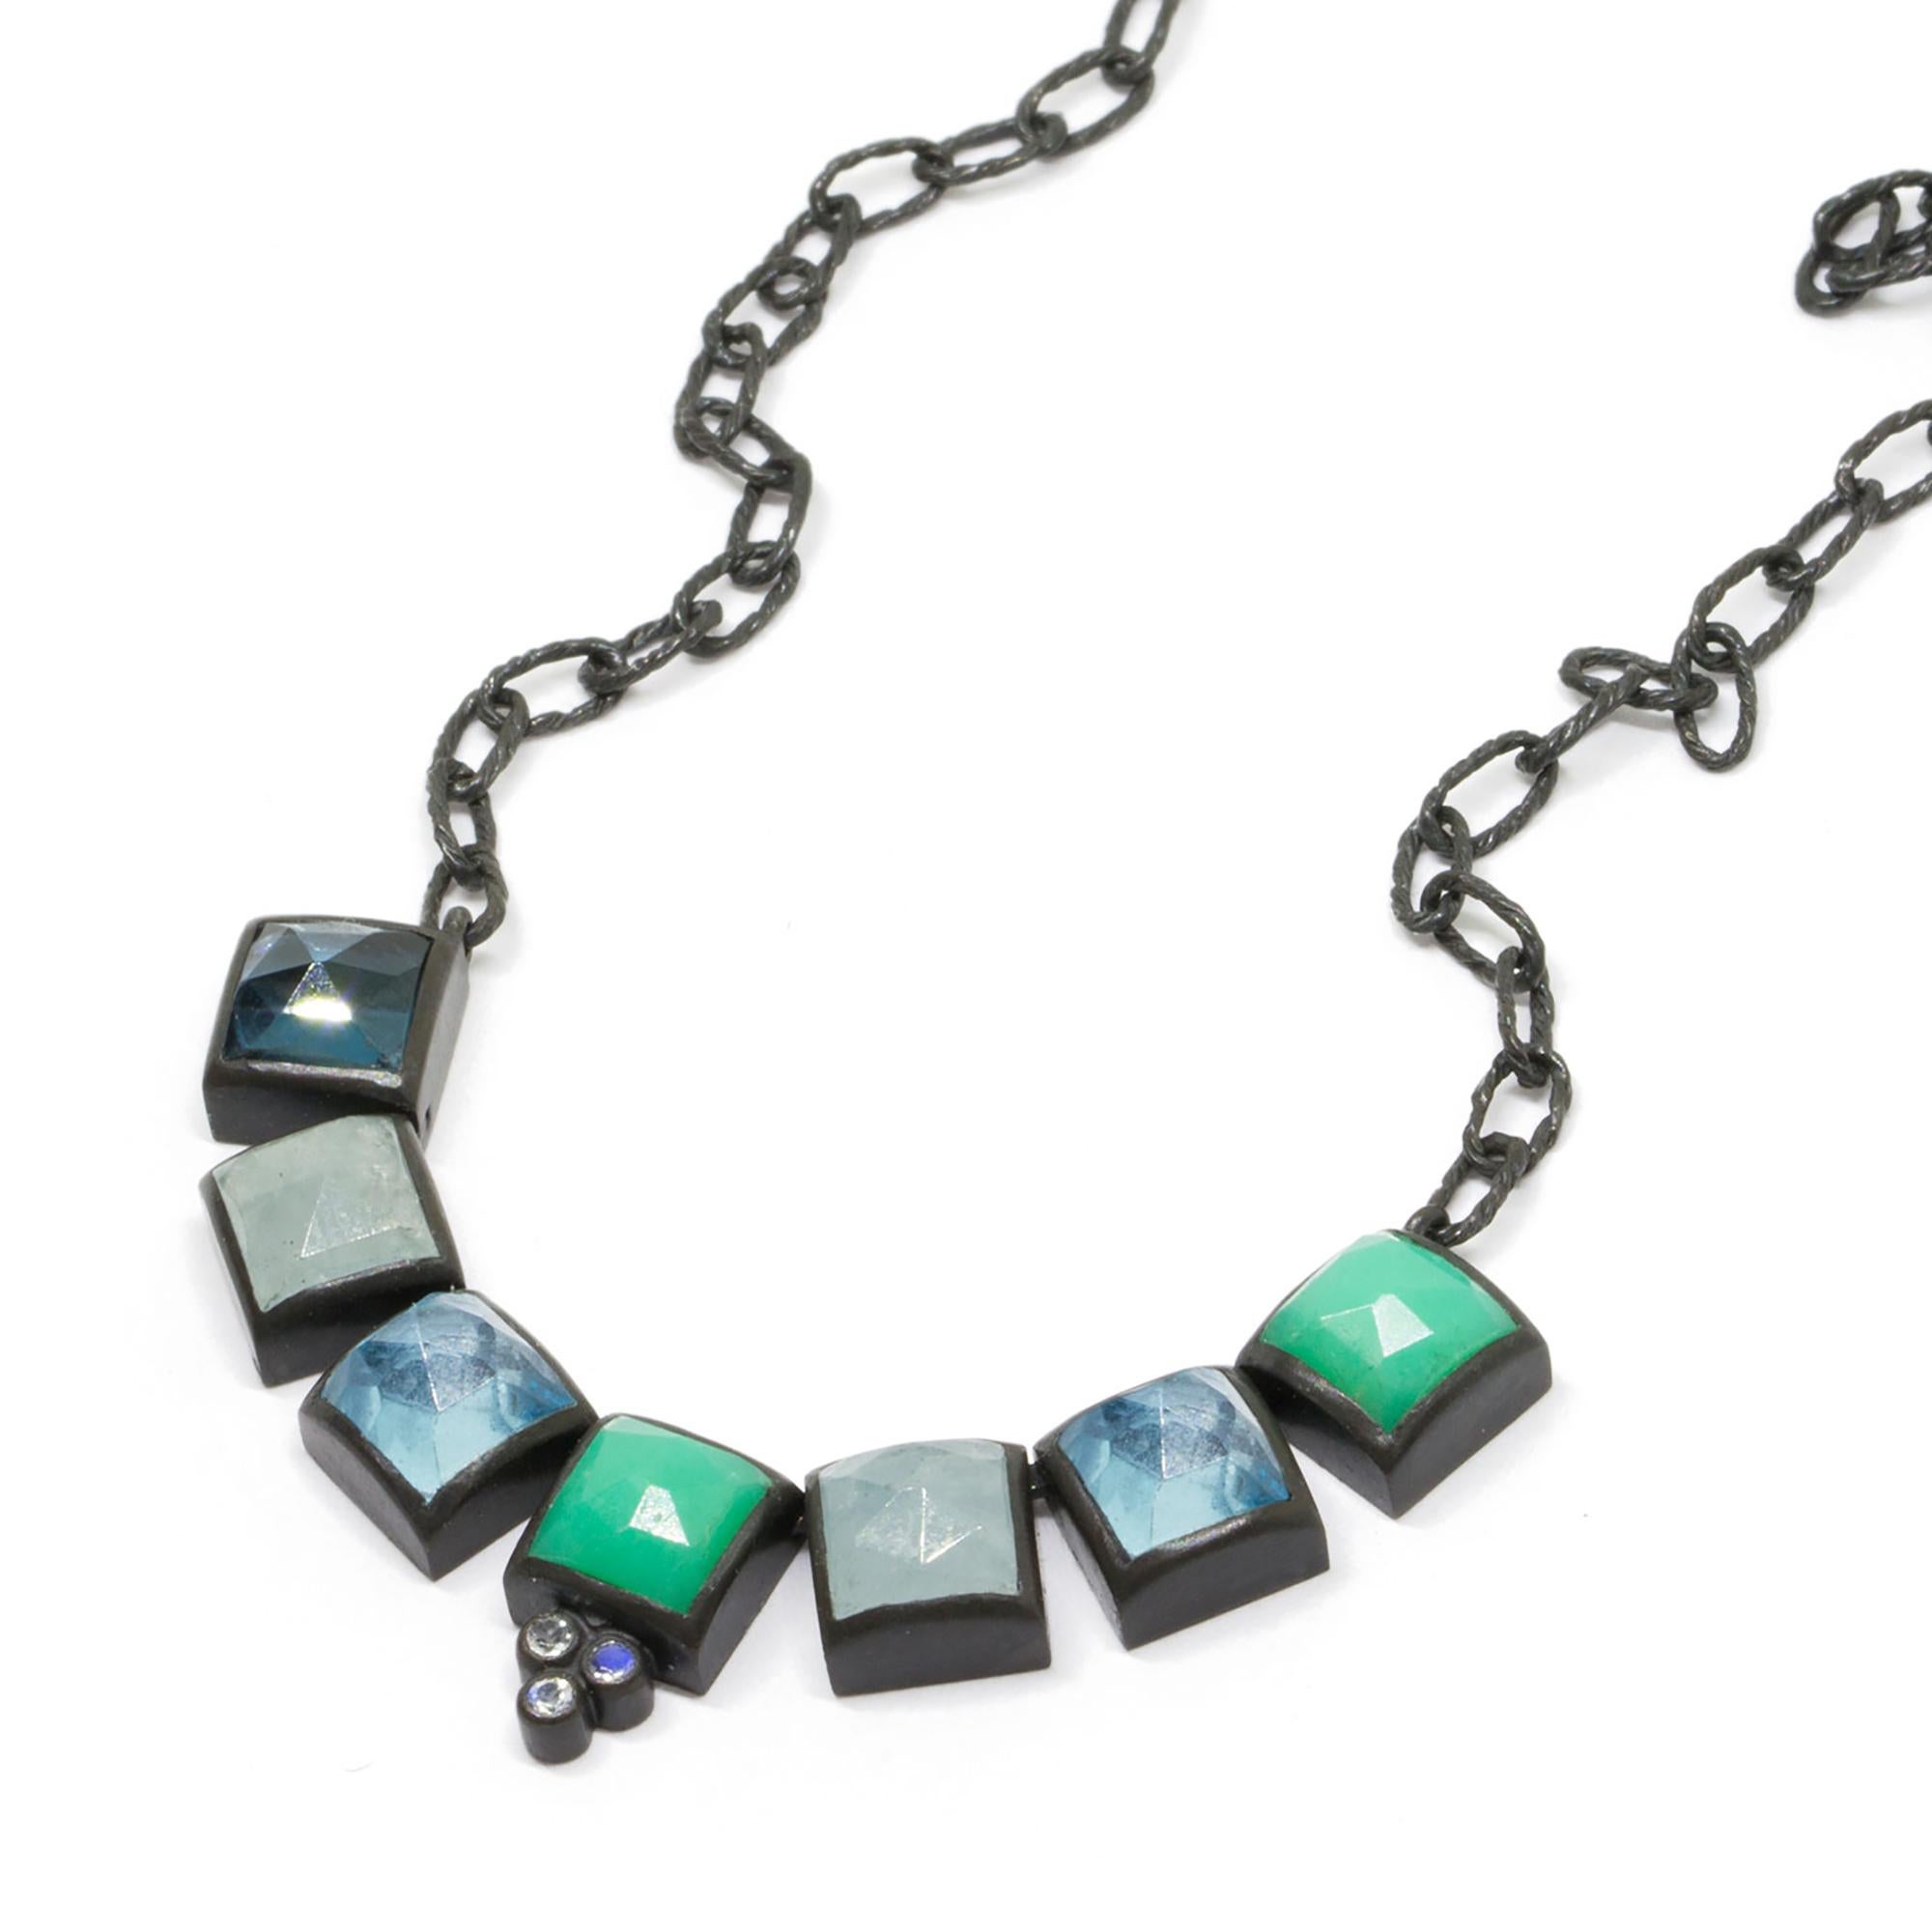 Contemporary Contemprary Gemstone Oxidized Necklace For Sale